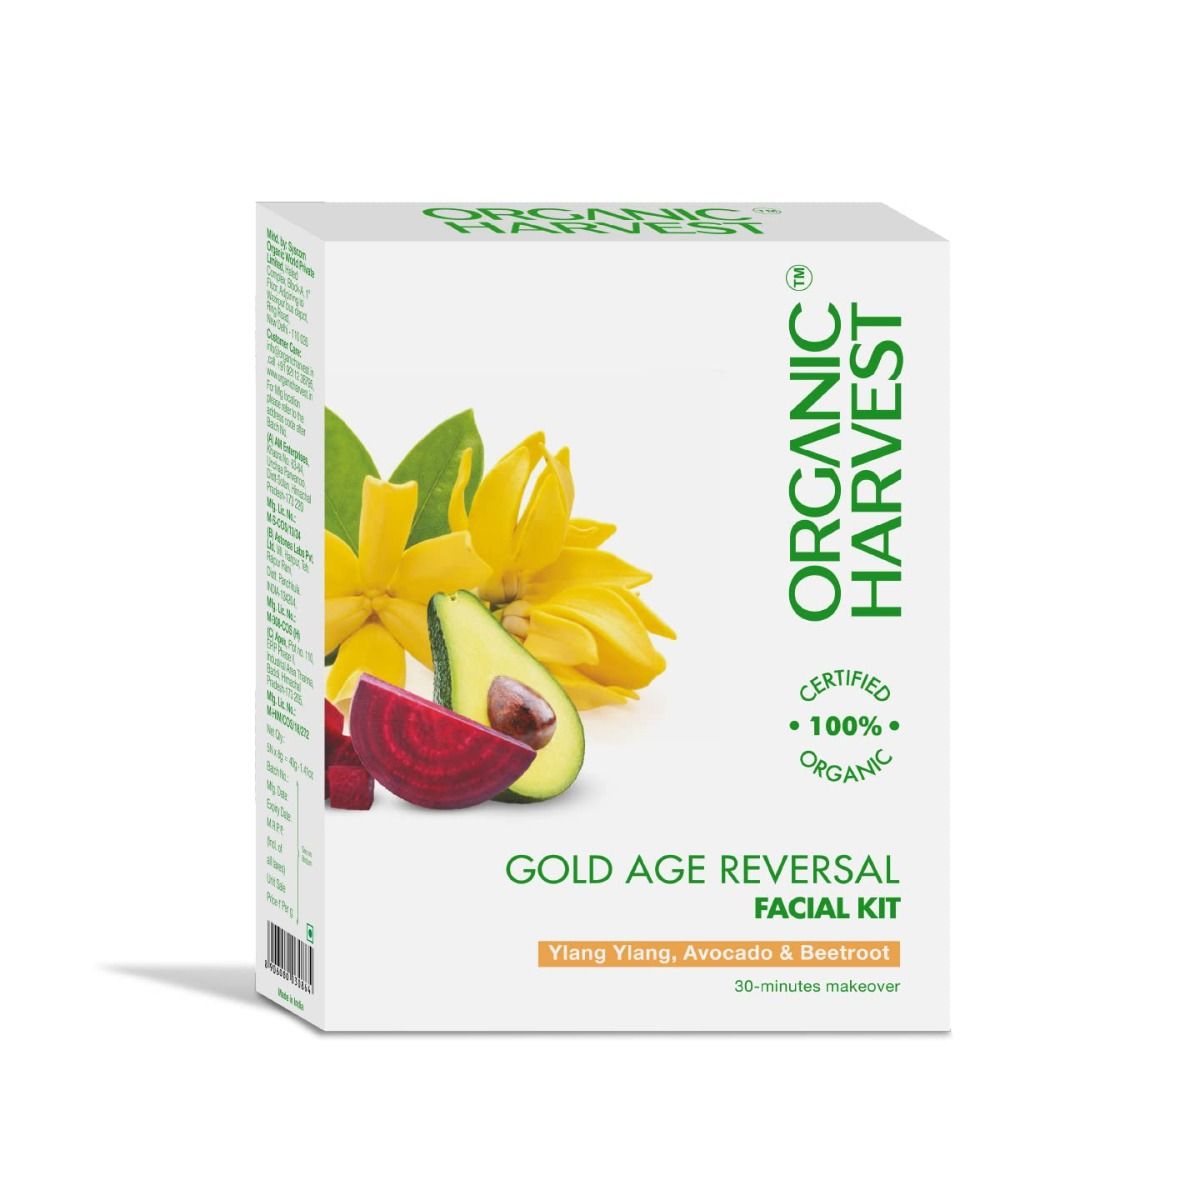 Buy Organic Harvest Gold Age Reversal Facial Kit, 1 Count Online